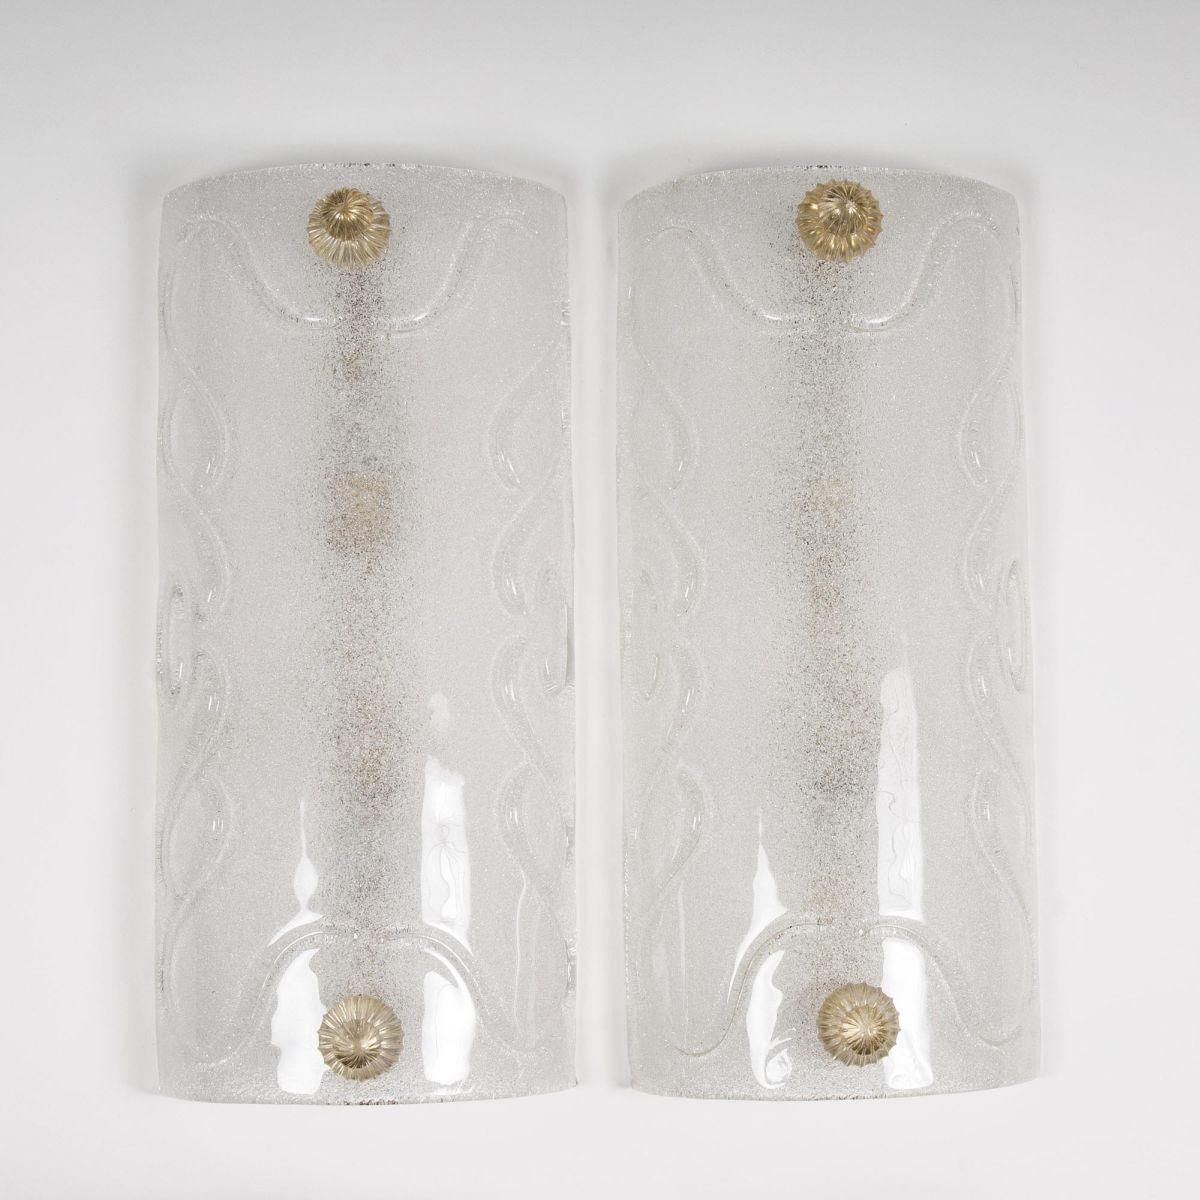 A Pair of Large Murano Ice Glass Wall Applications